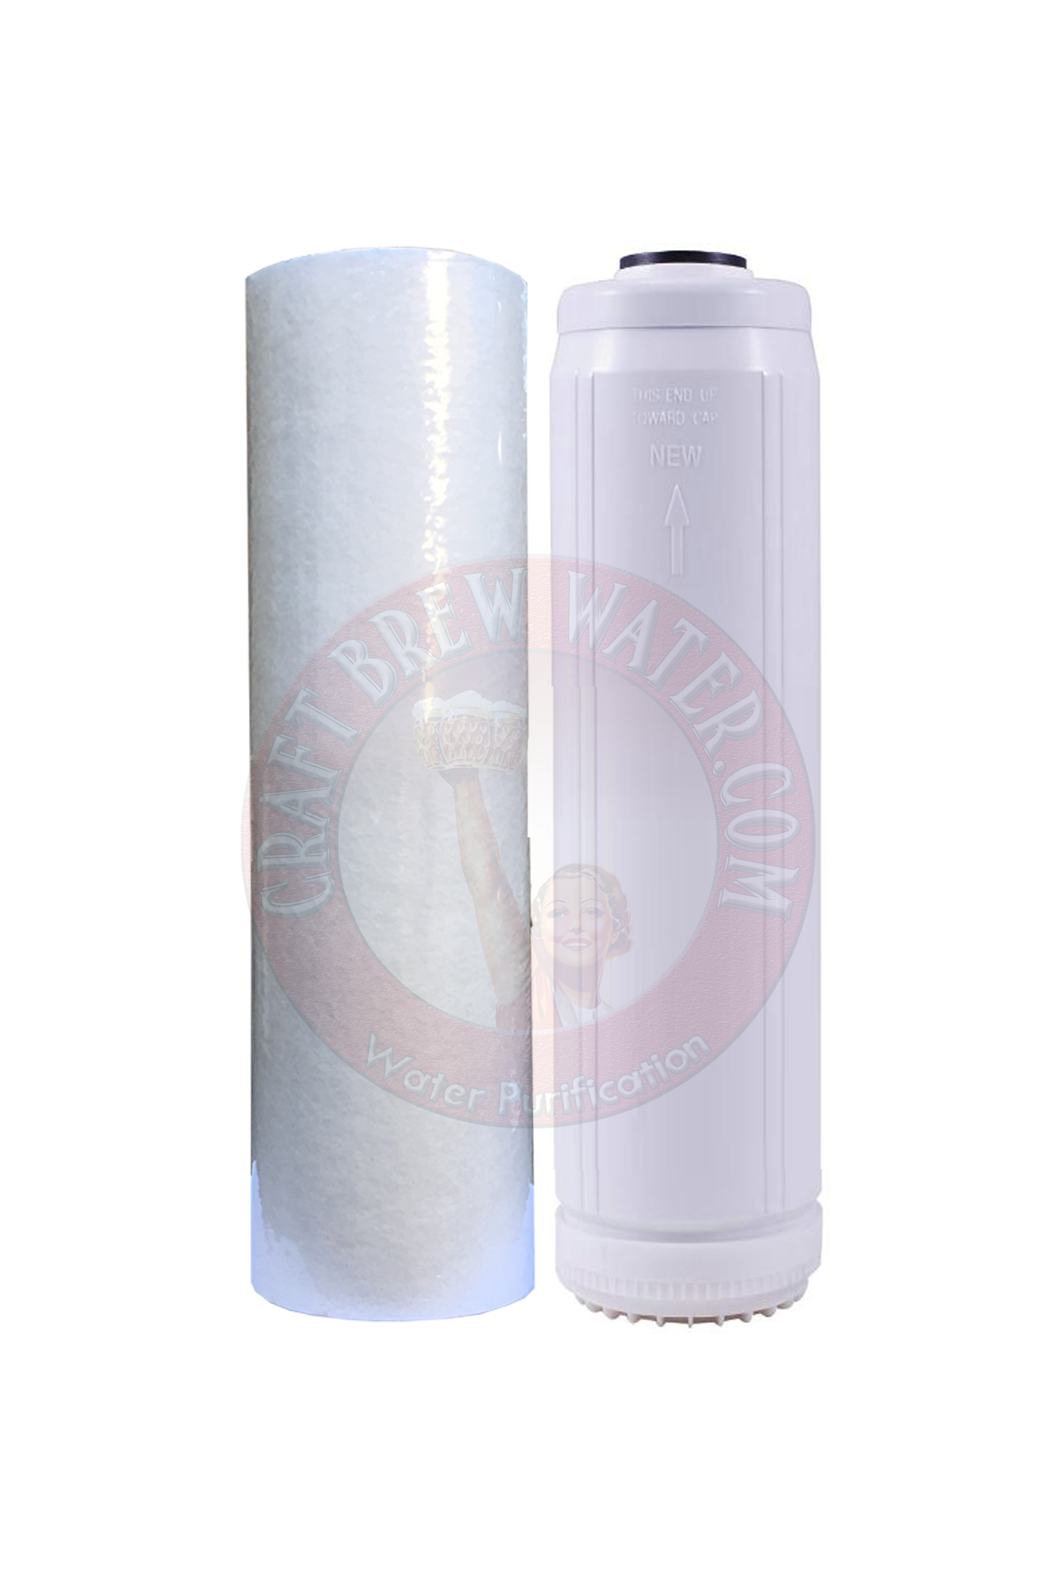 2.5" X 10" 25/5 Micron Melt-Blown Filter and 2.5" X 10" Cat Carbon Set for Chloramine removal